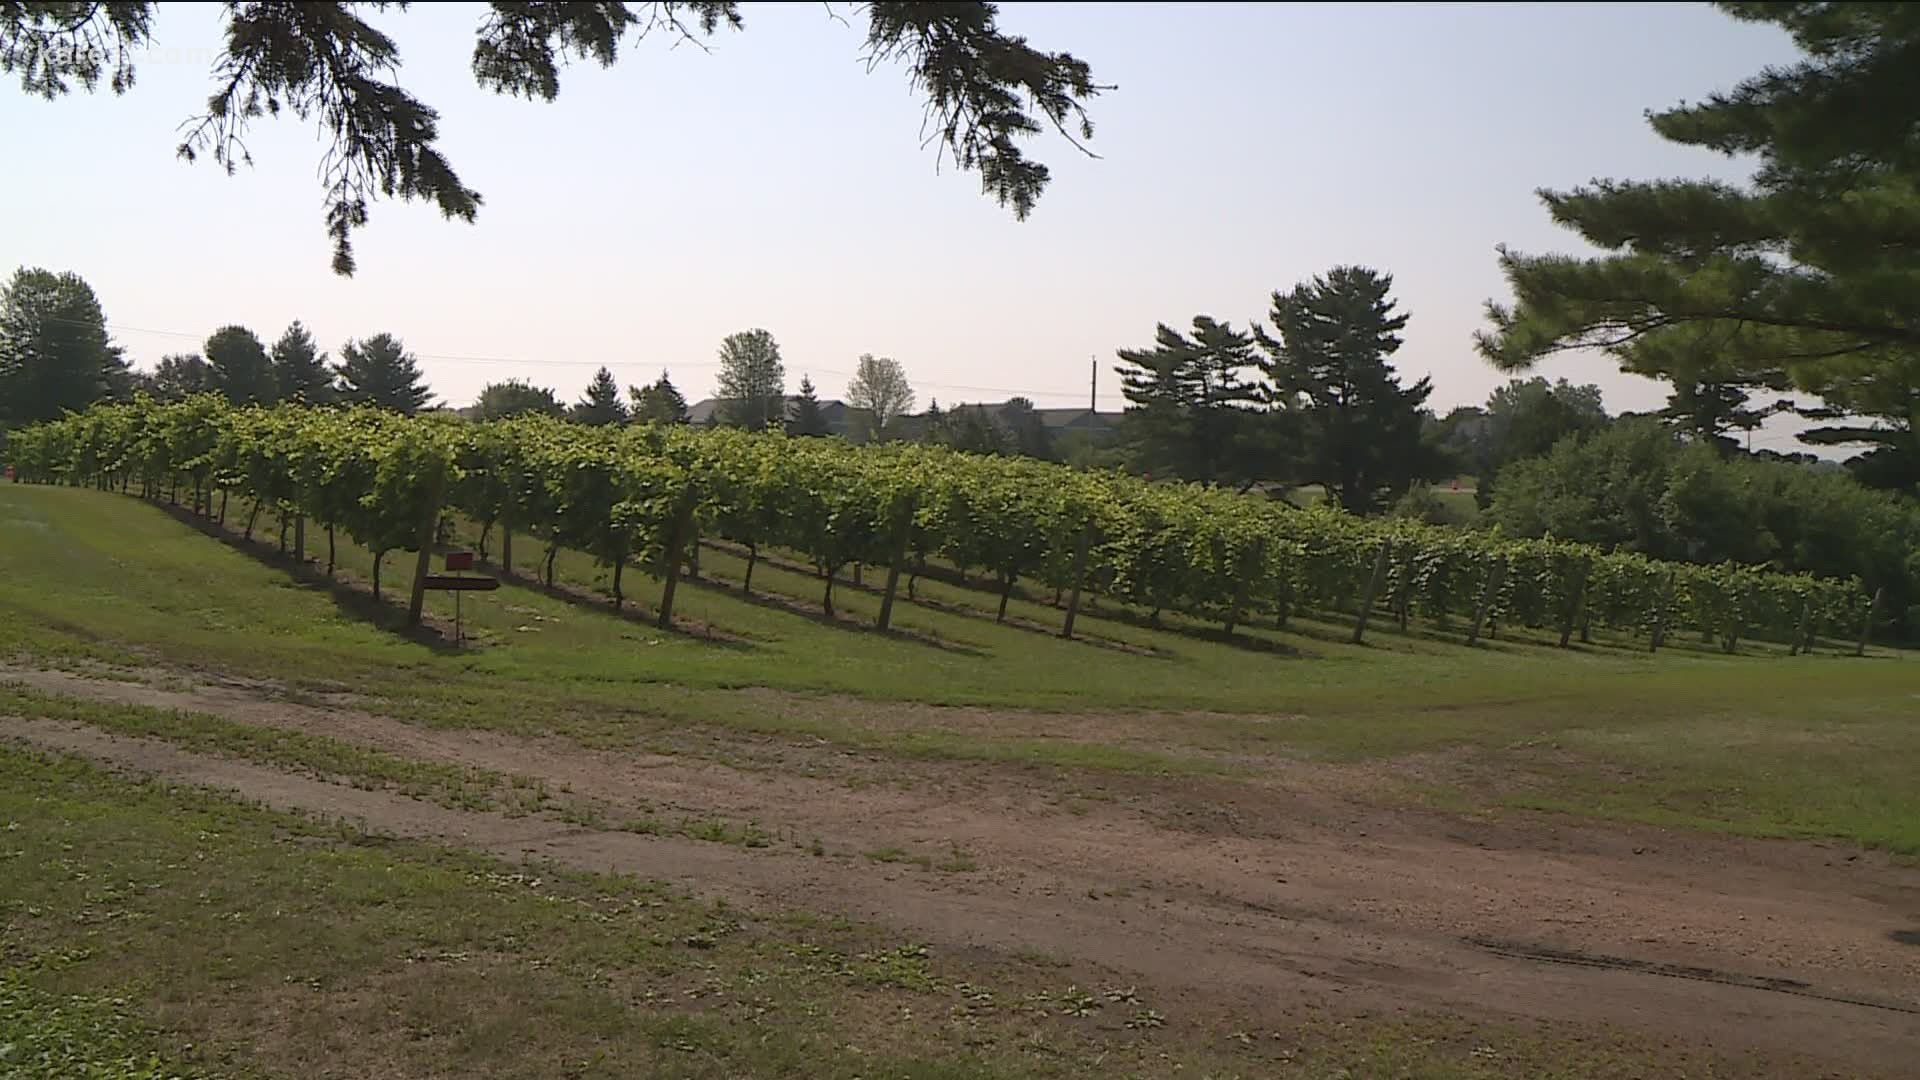 St. Croix Vineyard in Stillwater says the lack of rain keeps grapes sweet and free from diseases.